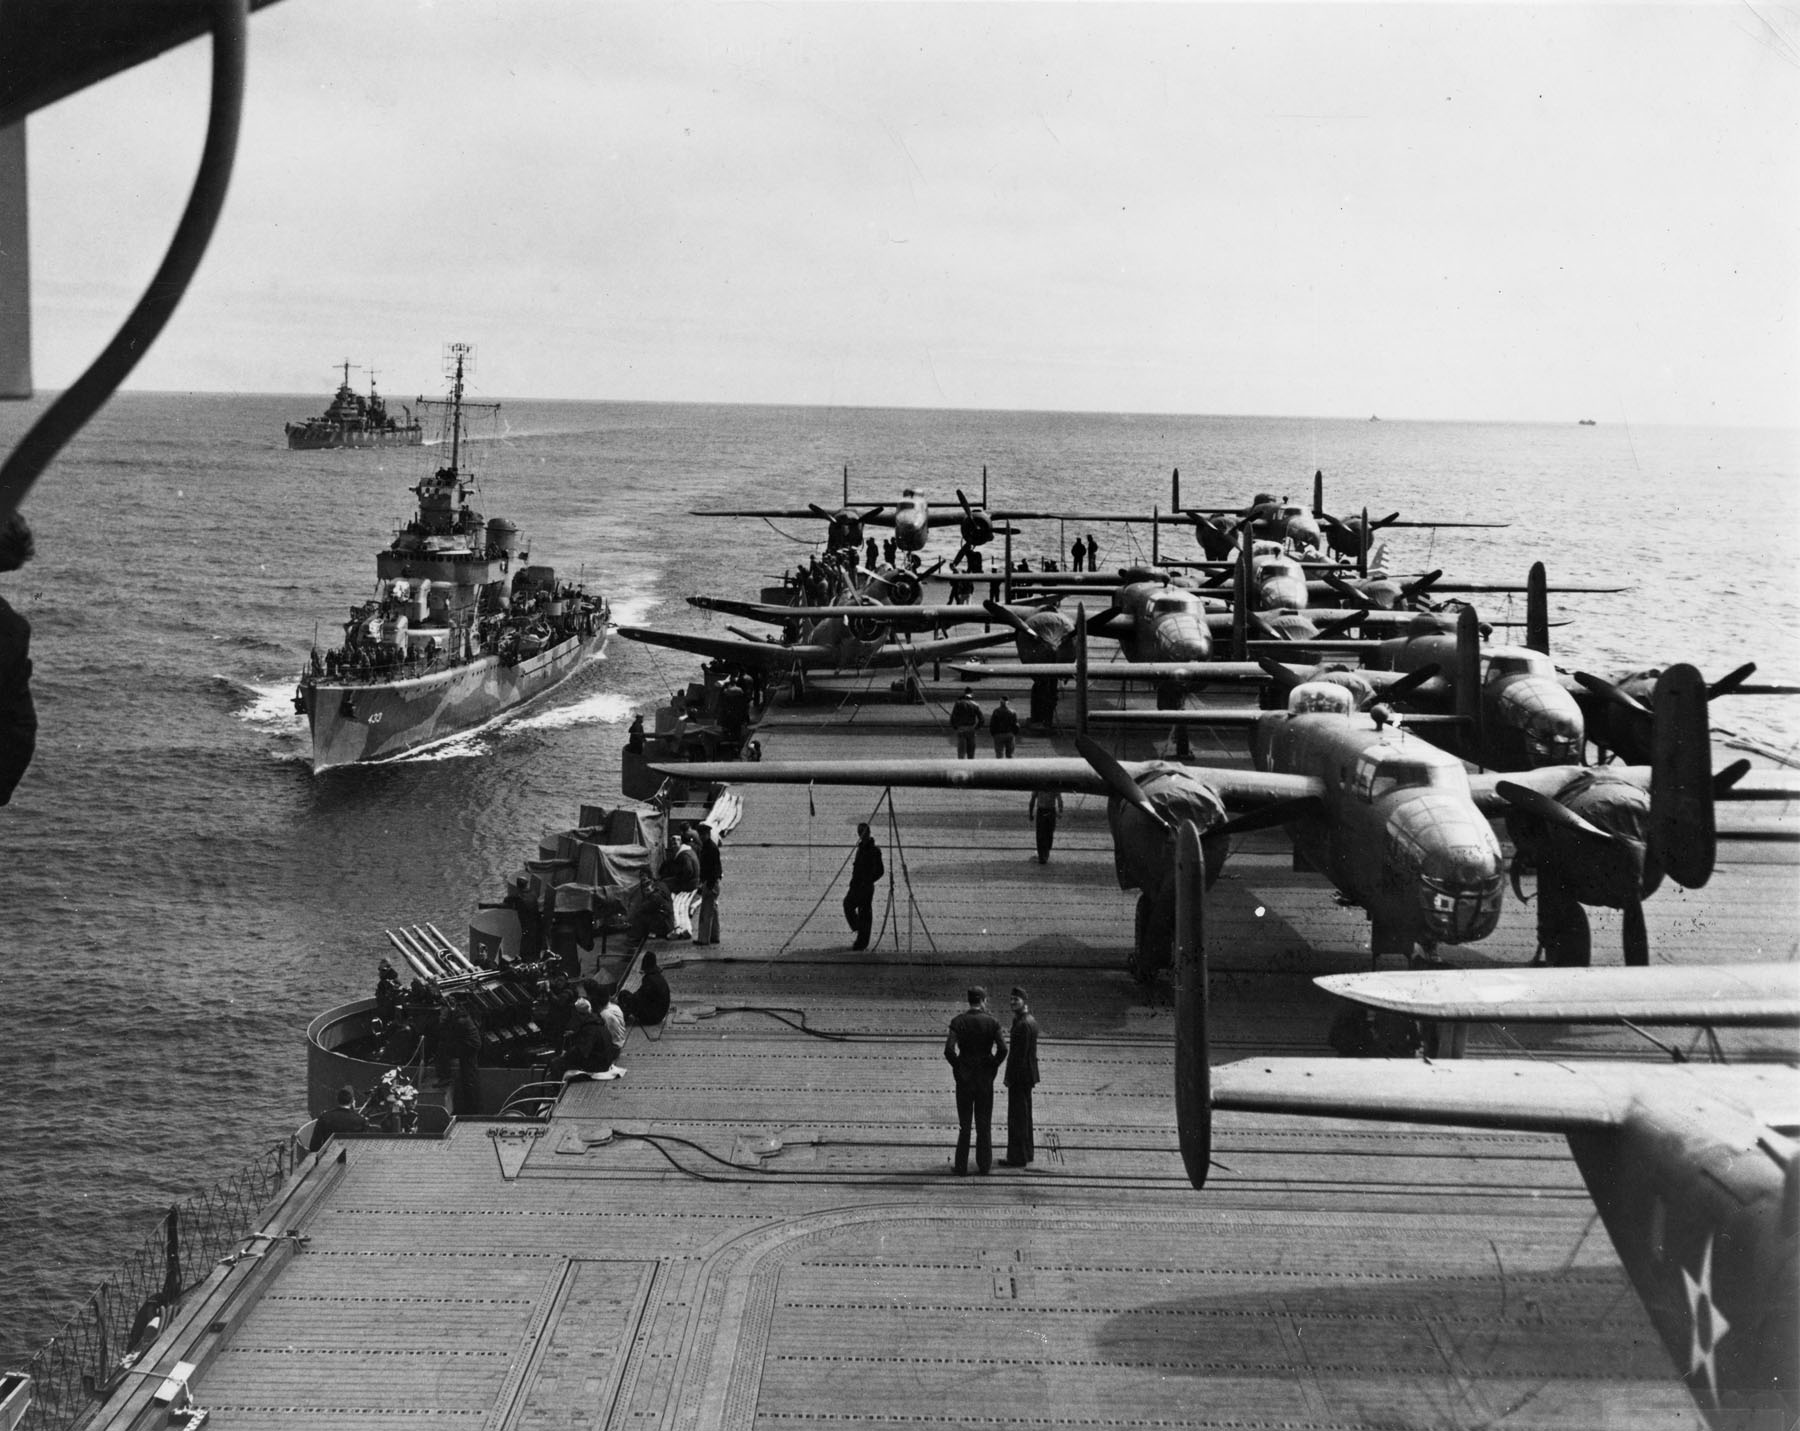 Aft flight deck of USS Hornet while en route to the launching point of the Doolittle Raid, Apr 1942; note USS Gwin and USS Nashville nearby